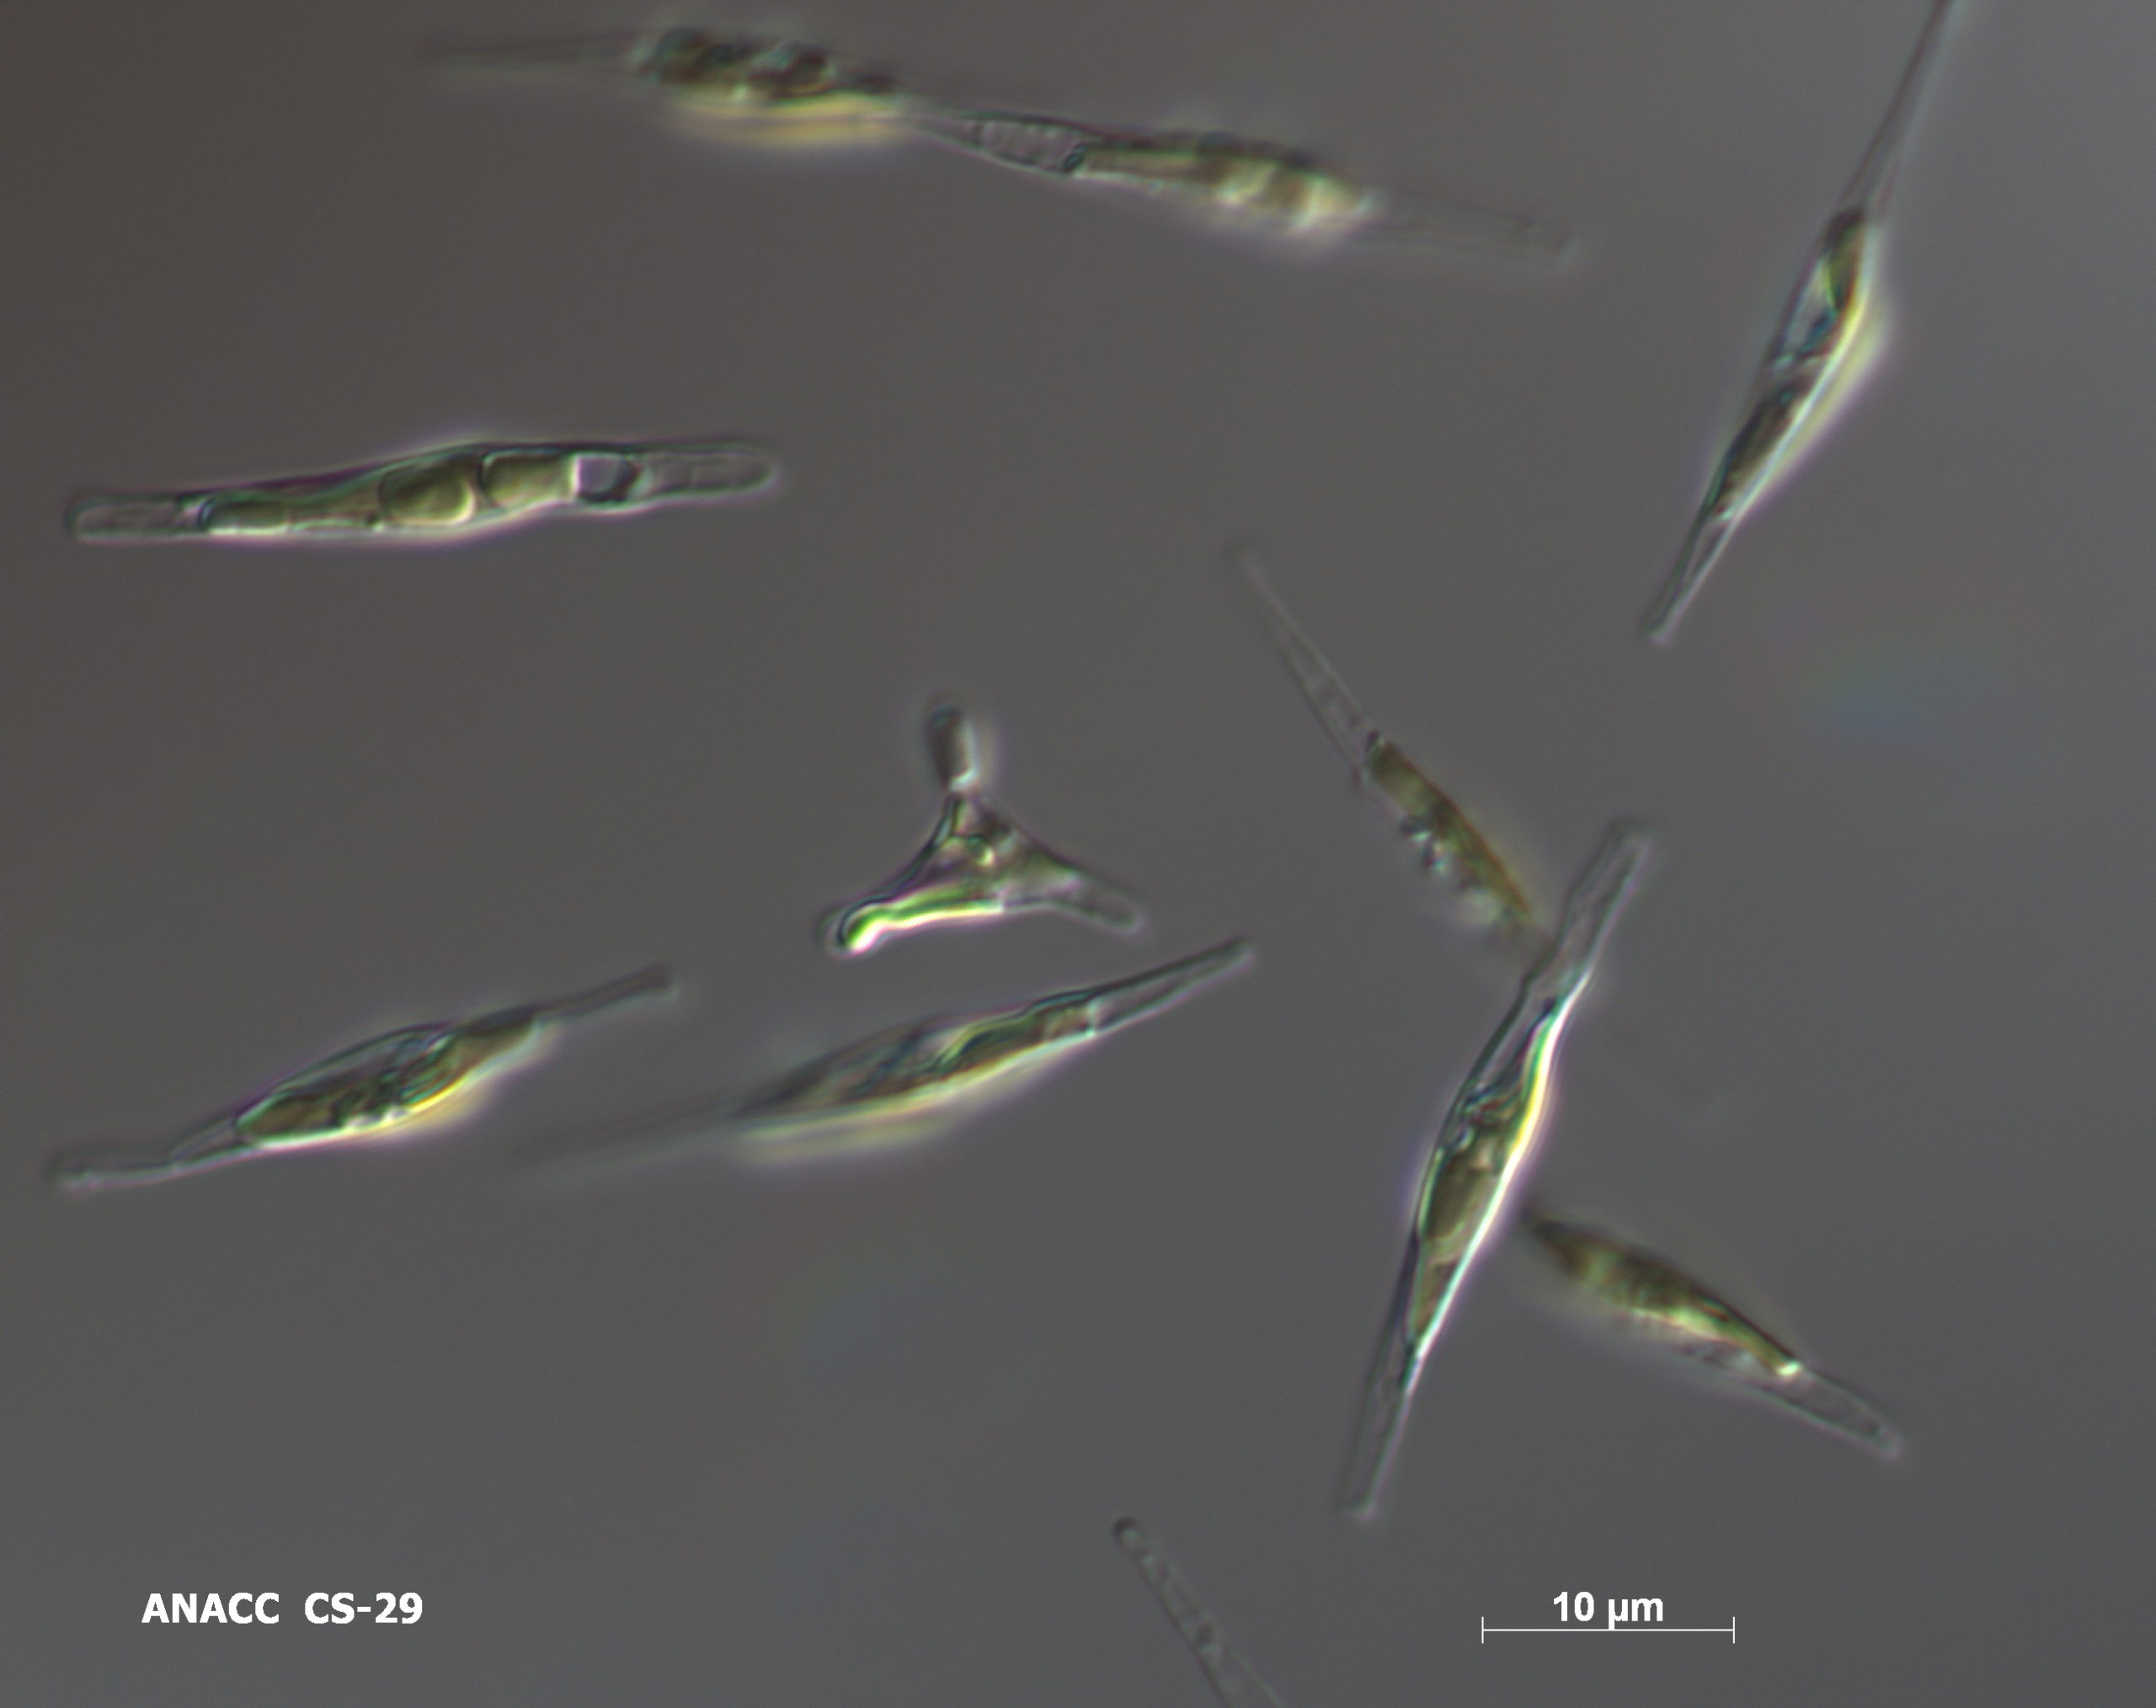 CS29 Phaeodactylum are seen at x1000 magnification against a grey background.